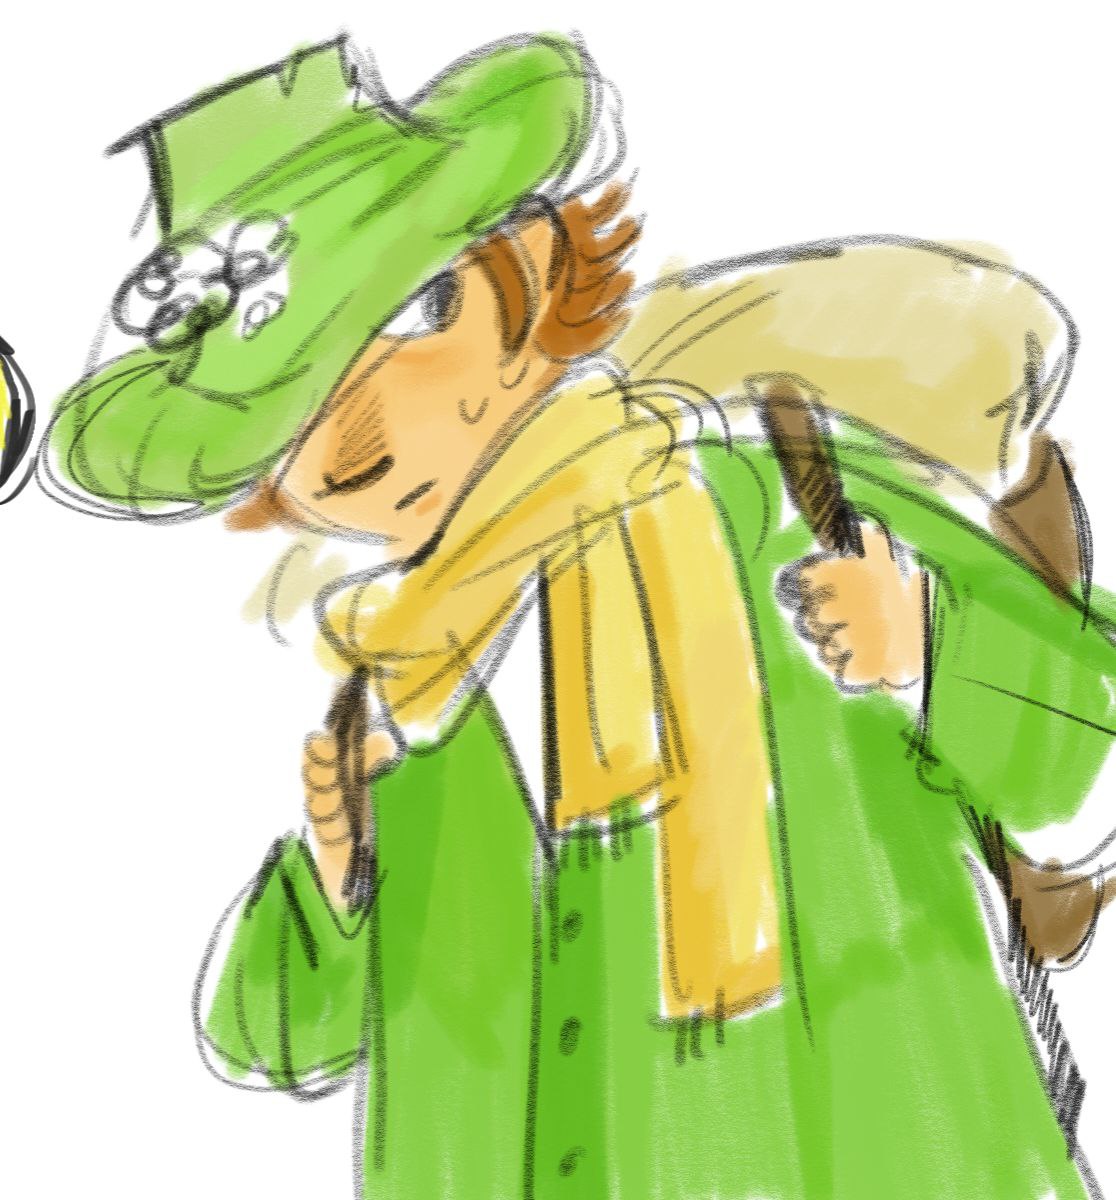 Kind of obsessed with moomins rn
#snufkin